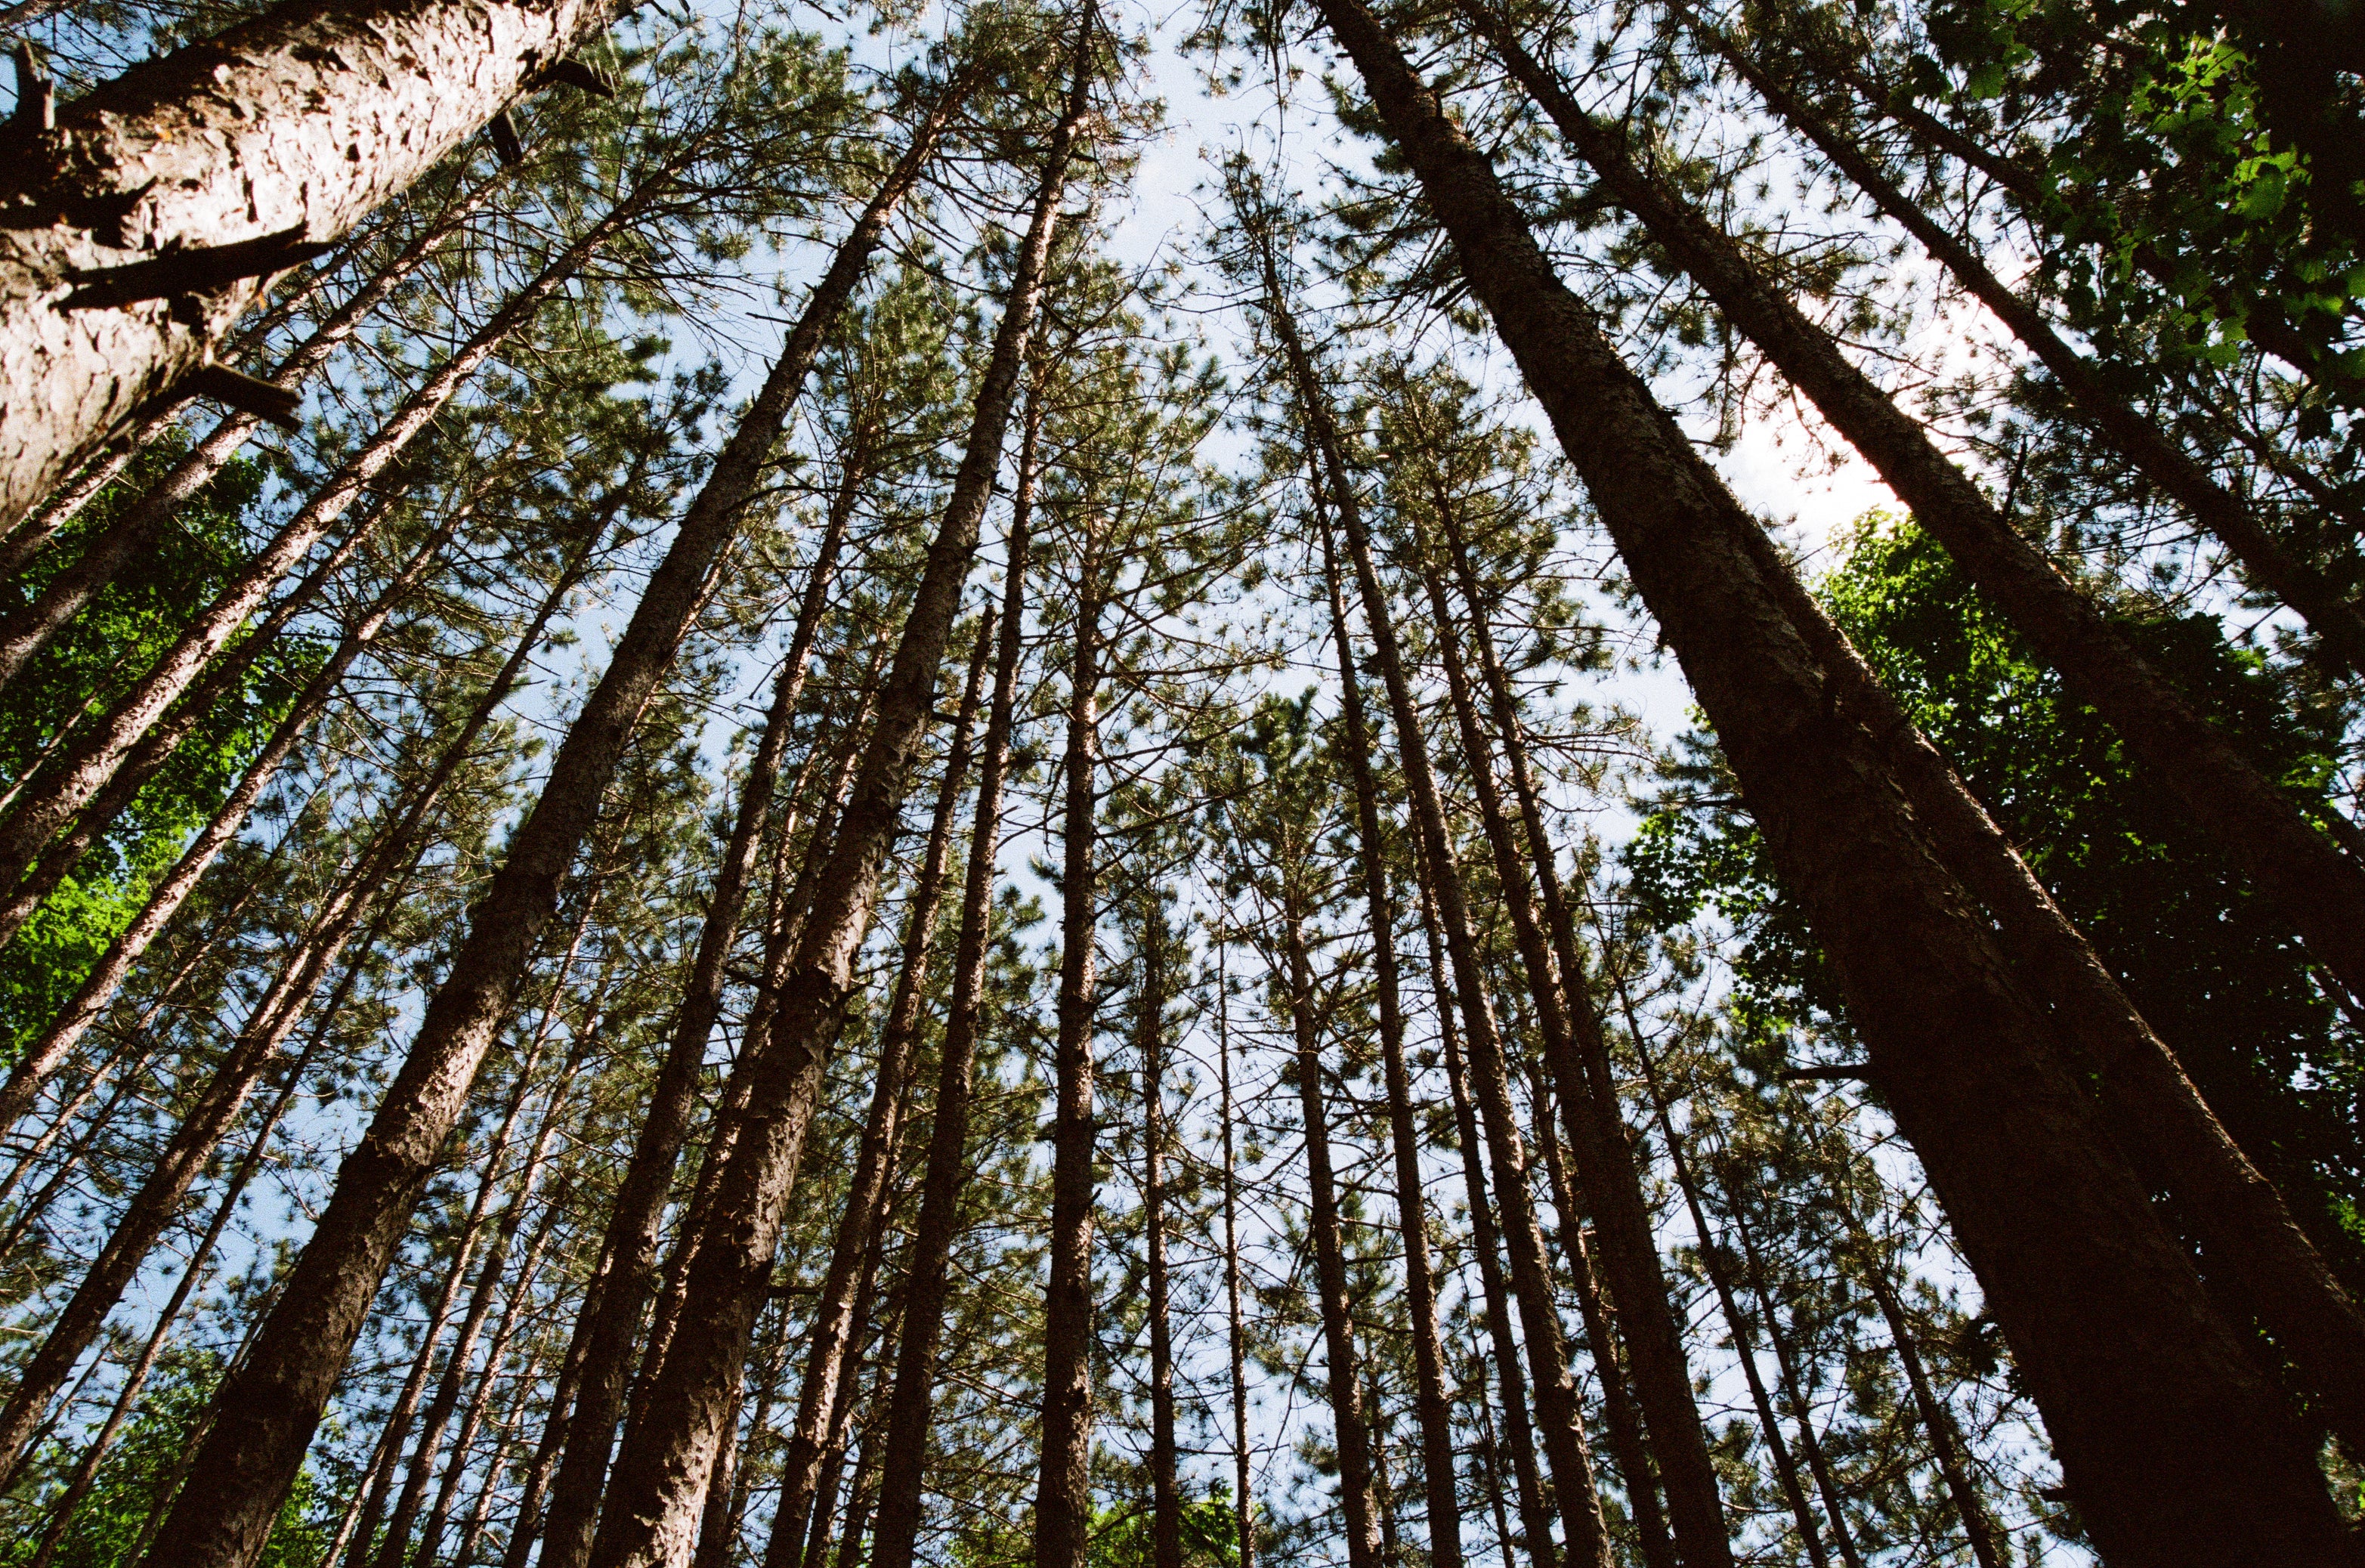 A photo looking up at tall trees